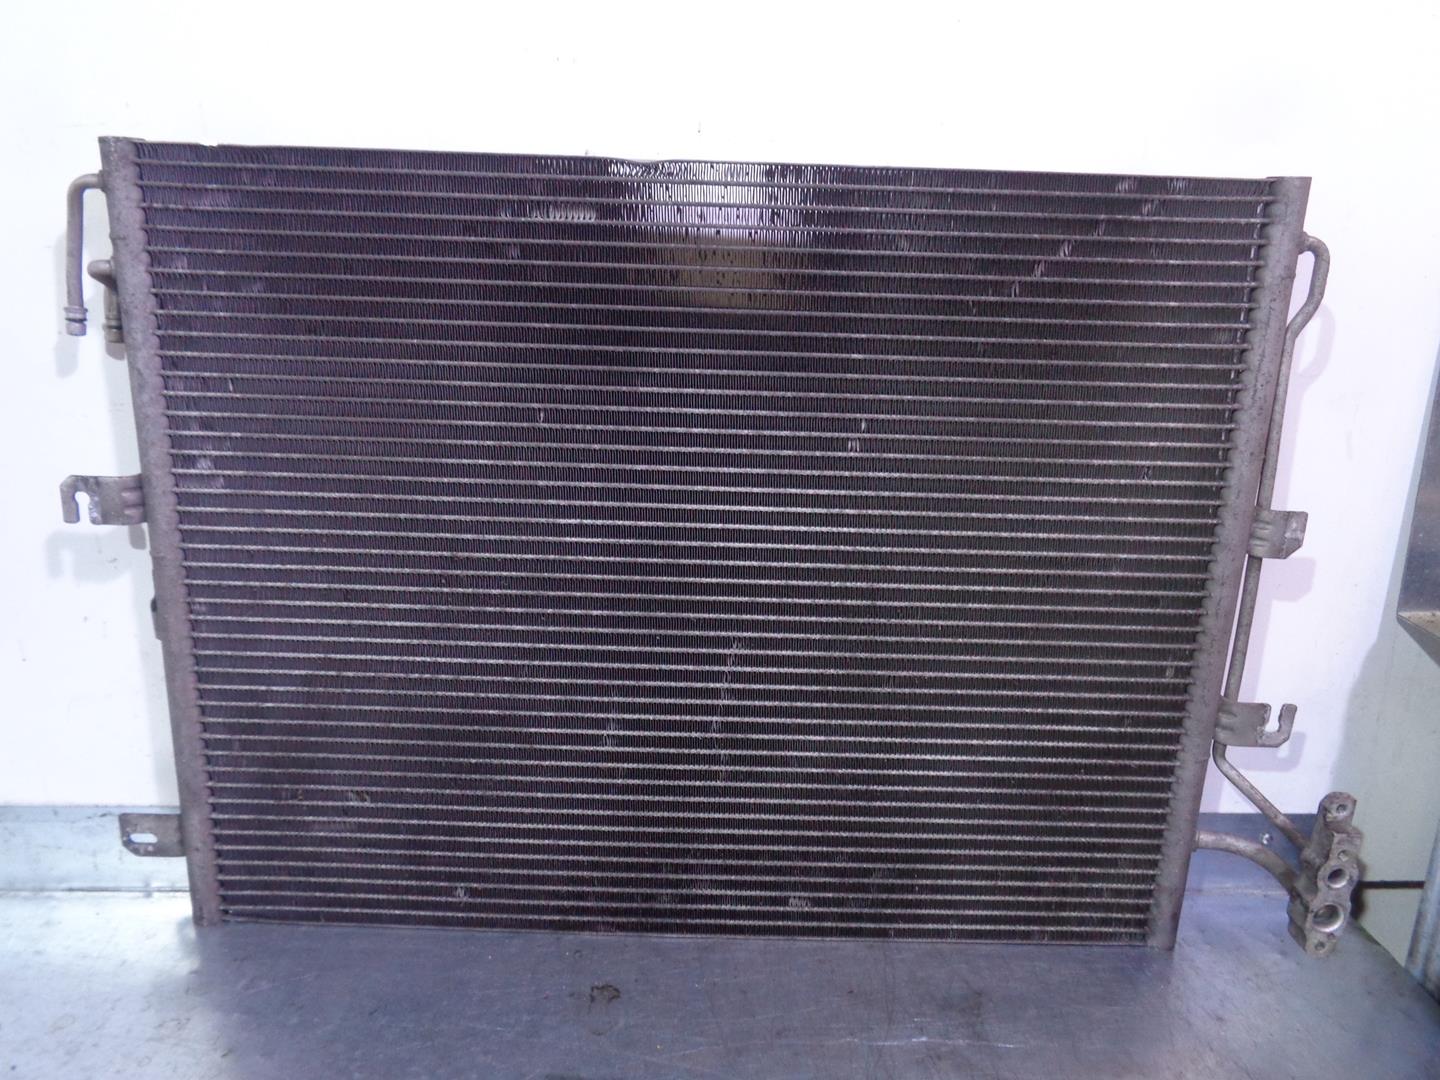 LAND ROVER Discovery 4 generation (2009-2016) Air Con Radiator ED86165400, JRB500040 21103806